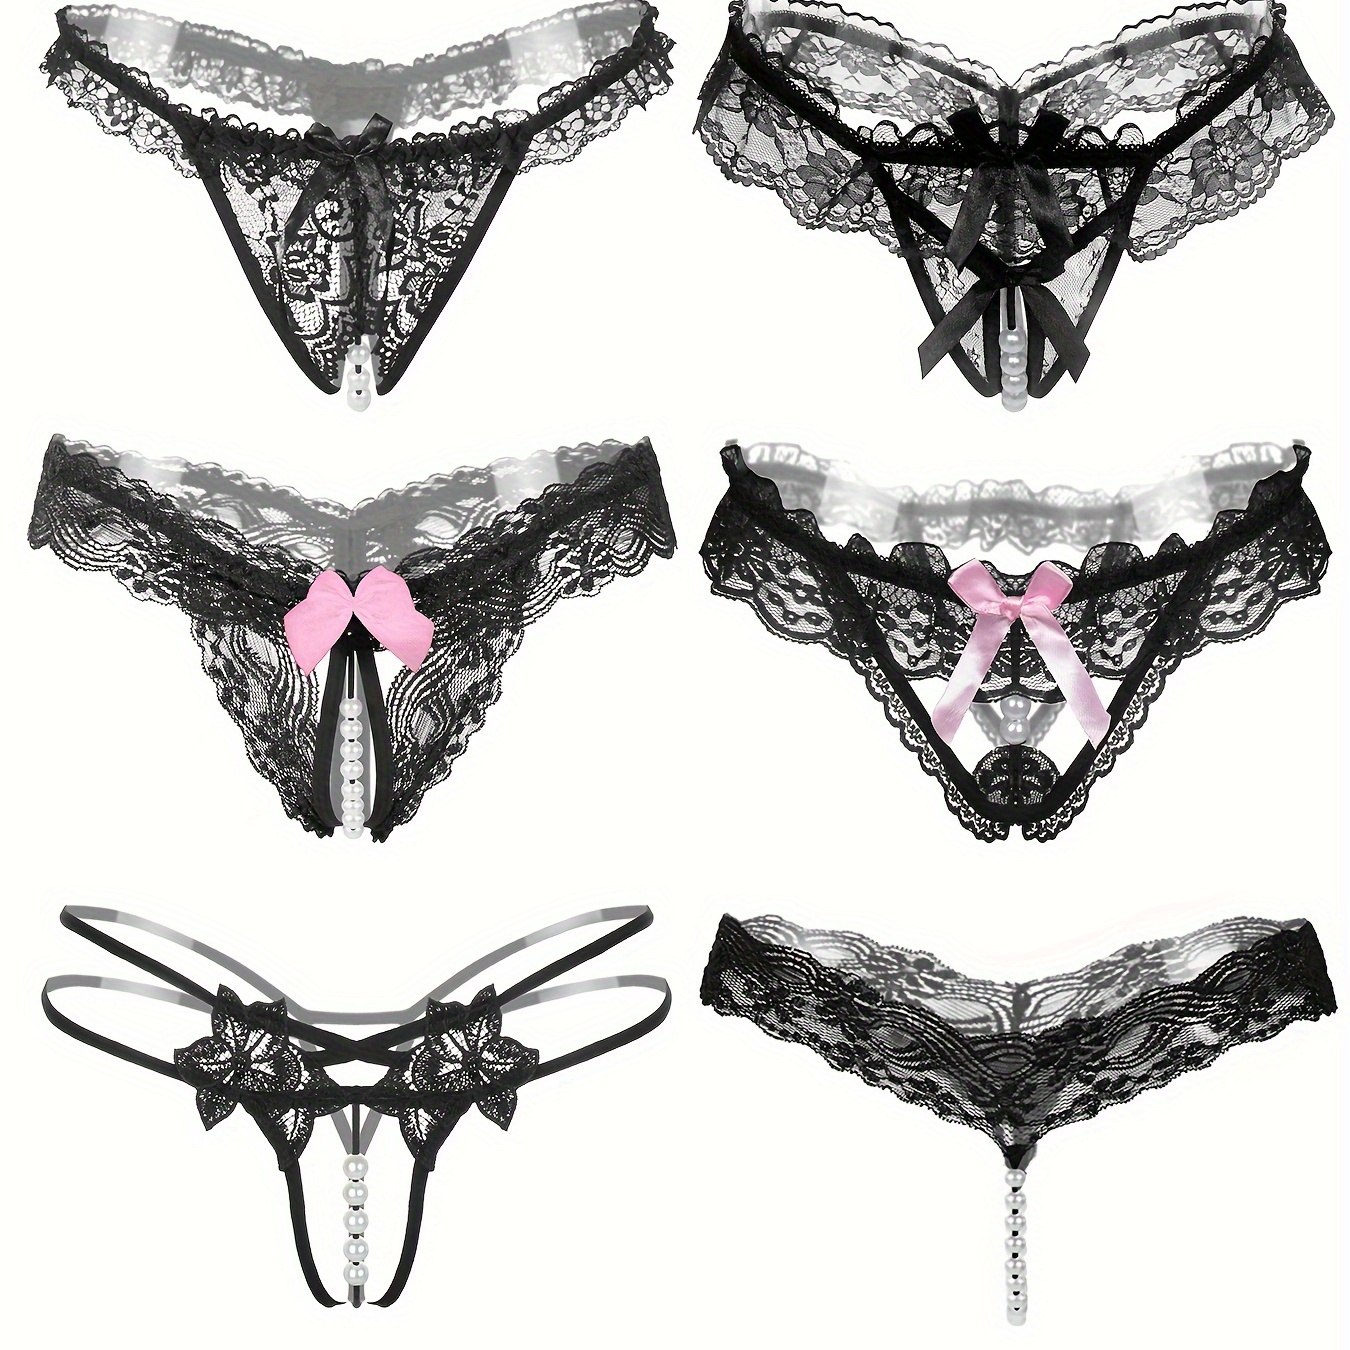 

6pcs Floral Lace Mesh Thongs, See Through Faux Pearl Bow Panties, Women's Sexy Lingerie & Underwear